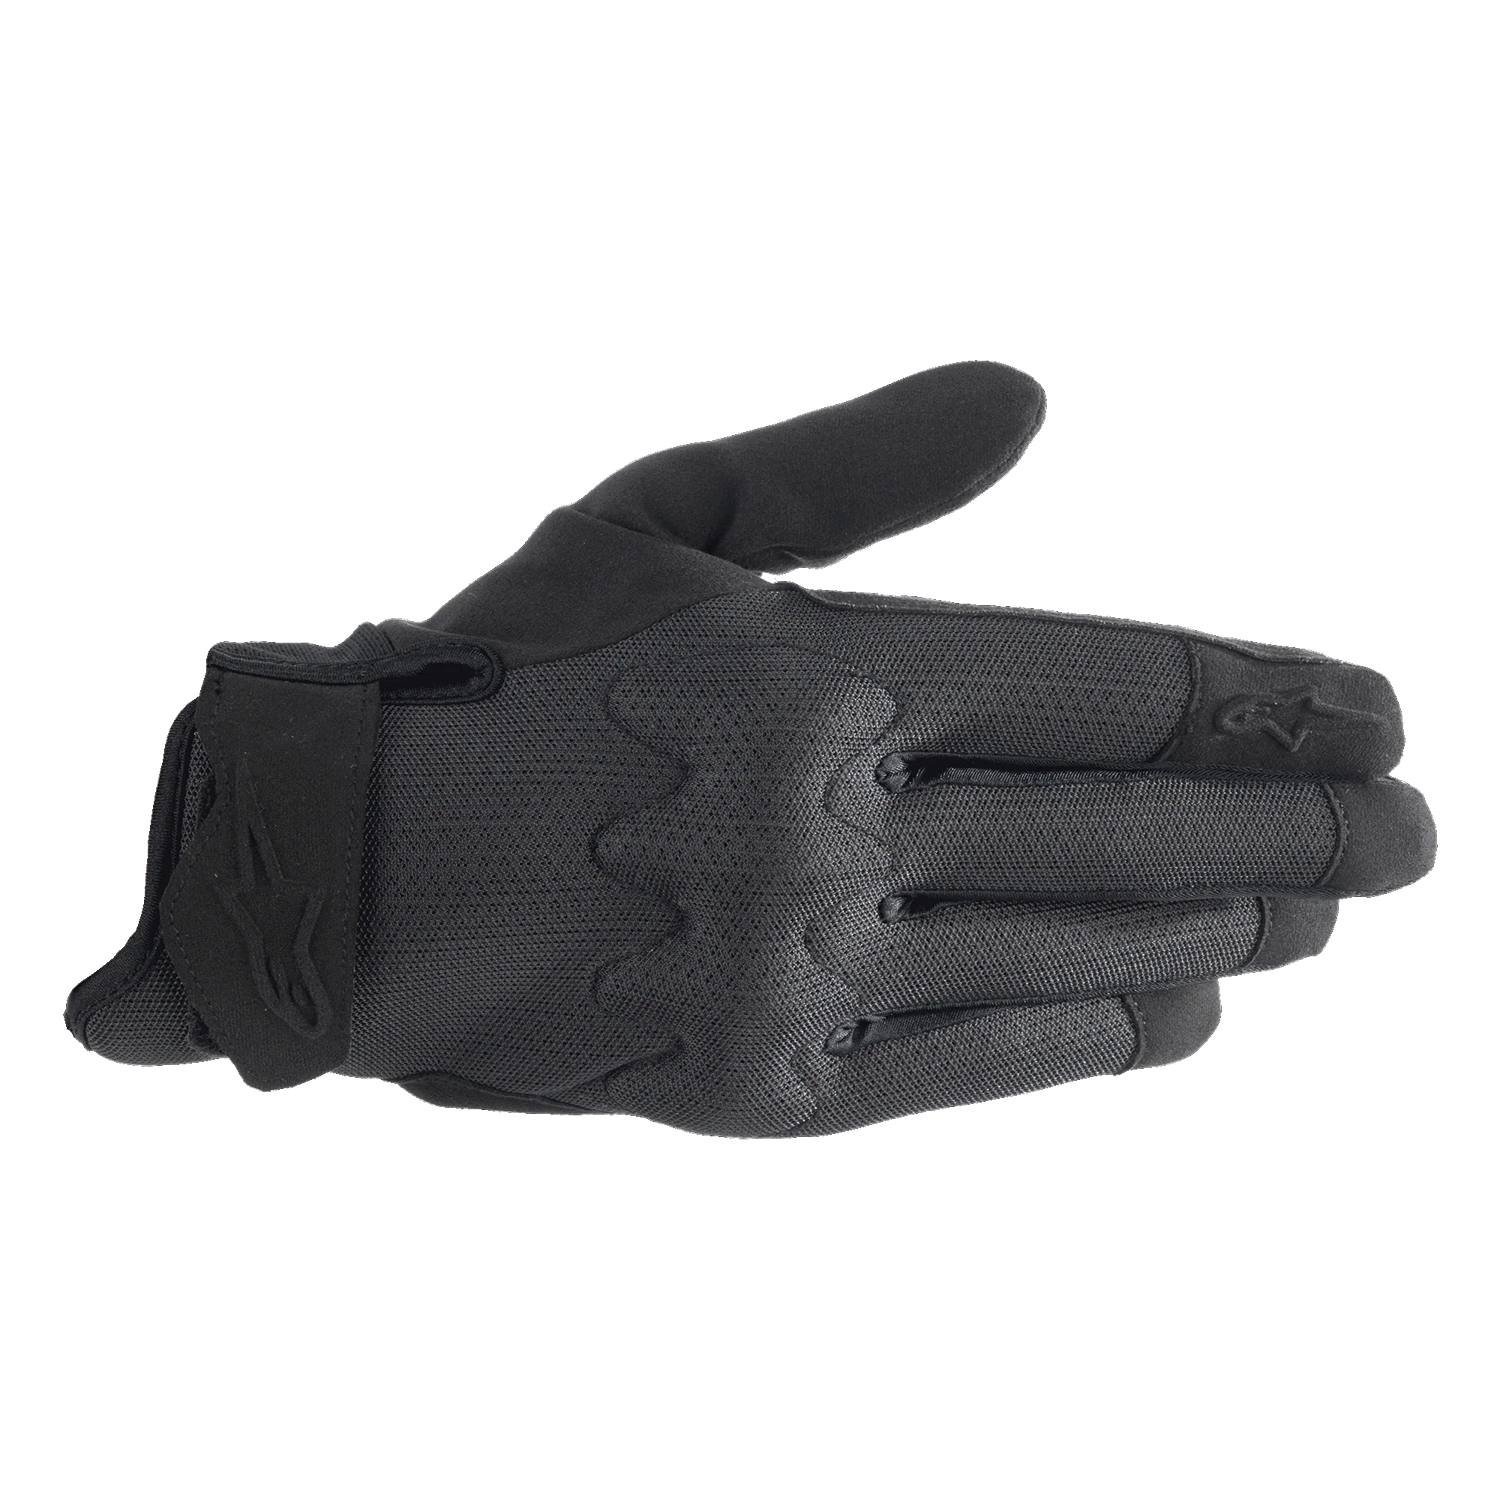 Image of Alpinestars Stated Air Gloves Black Size XL ID 8059347168616